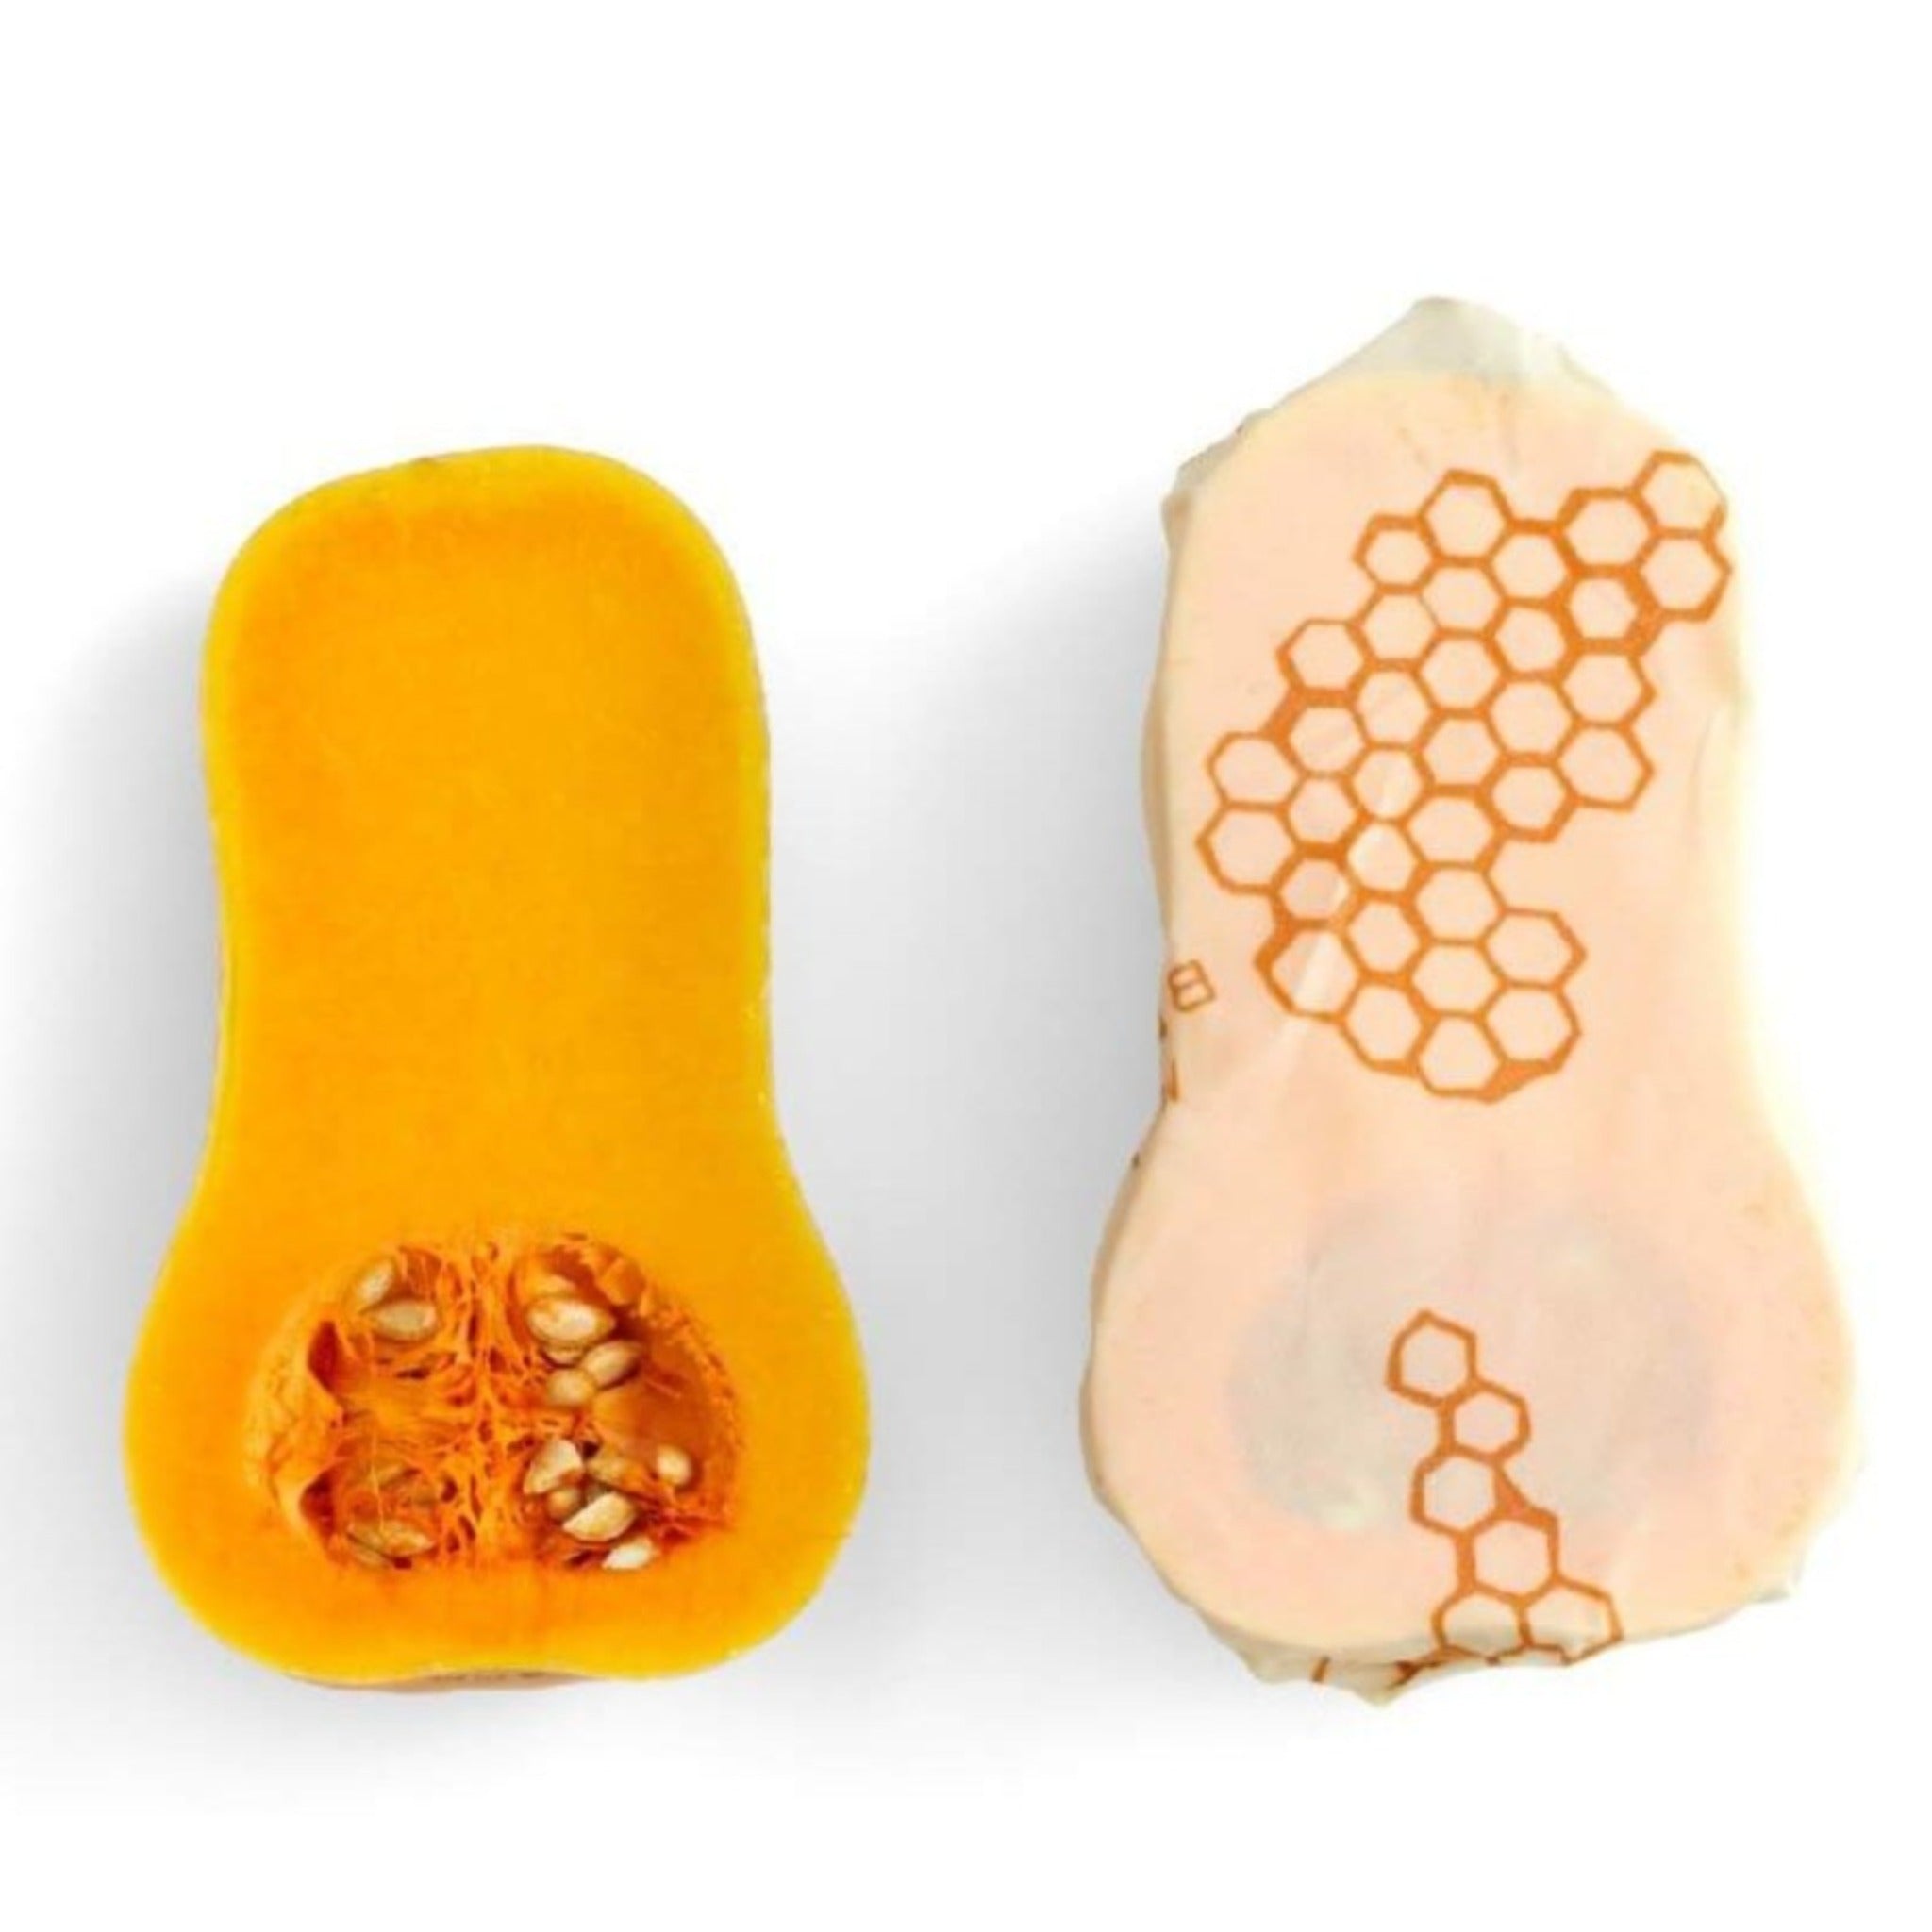 beeswax wrap in use overing squash vegetable